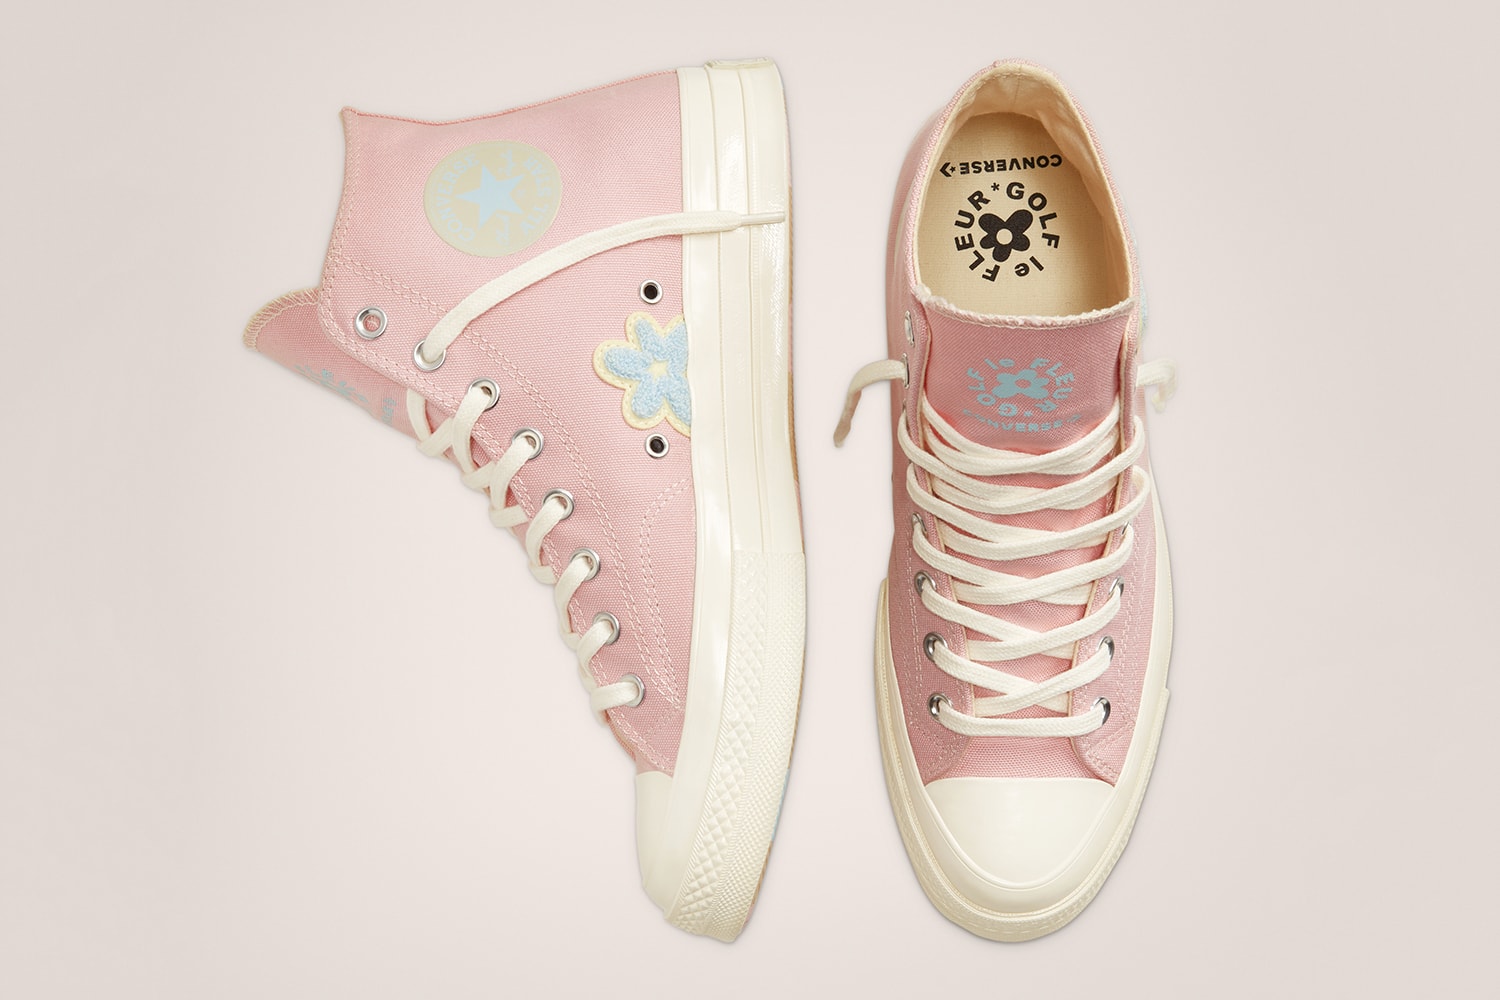 GOLF le FLEUR* Converse GLF Gianno Ox Chenille Chuck 70 Release Info Date camp flog gnaw Pink Blue Patch